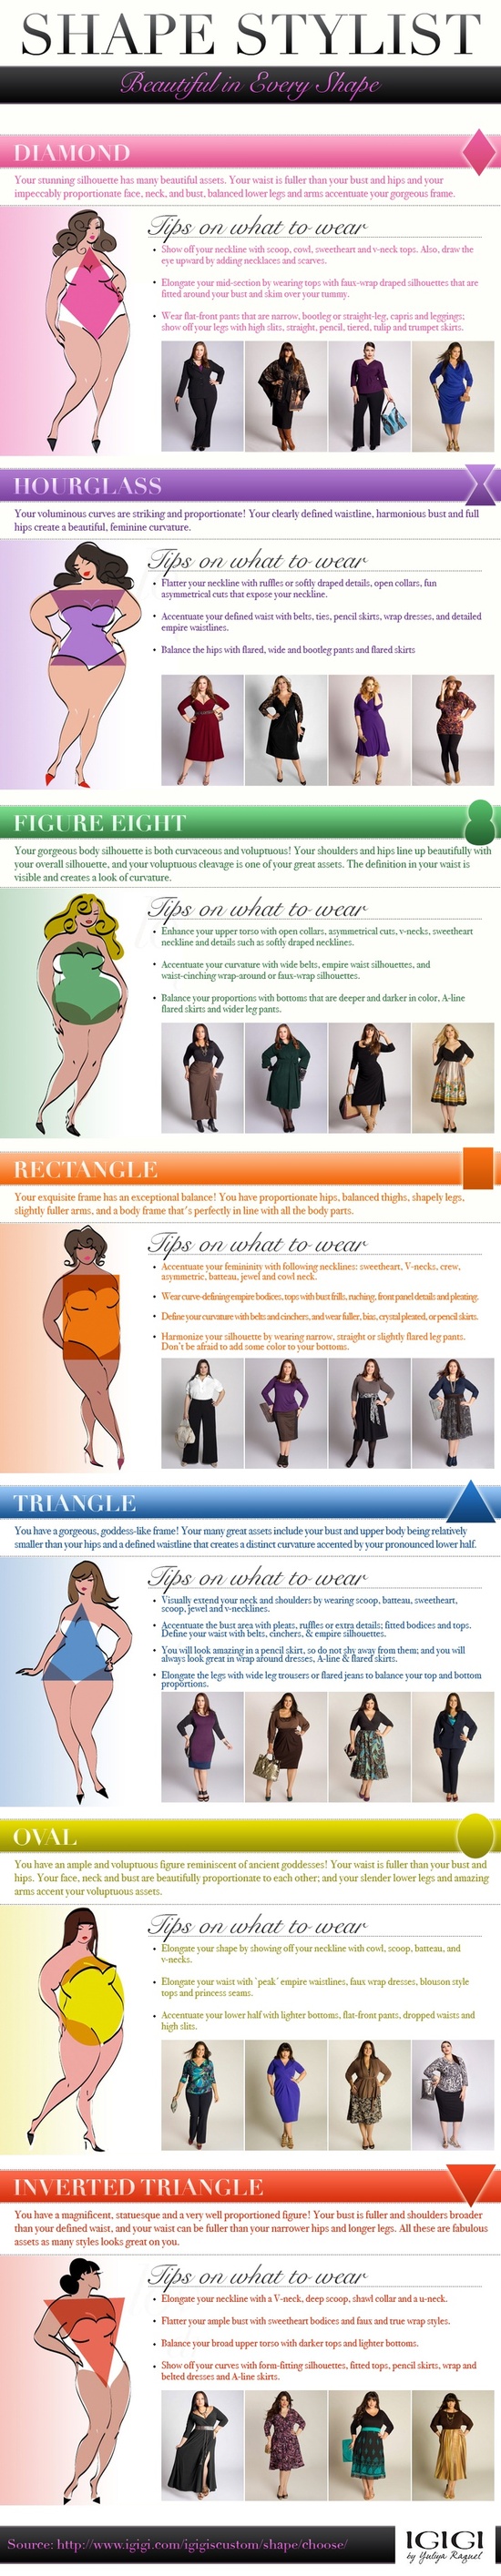 Dressing for your shape